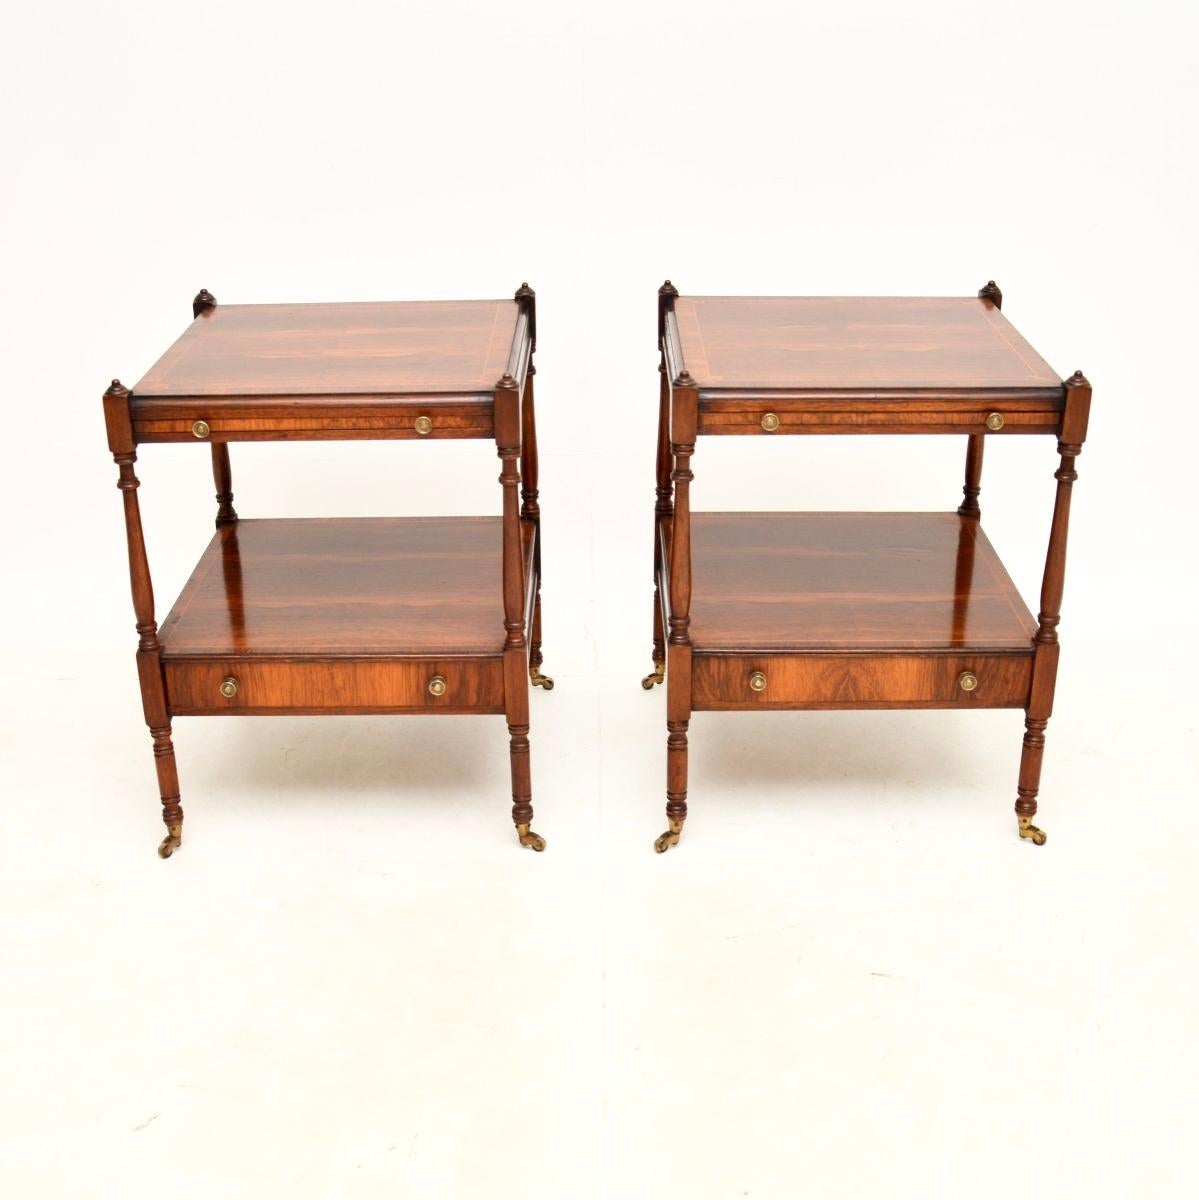 A fantastic pair of antique Georgian style side tables. They were made in England, and date from around the 1930’s.

The quality is great, they are very well made with cross banded tops, beautiful inlays around the borders, nicely turned finials and